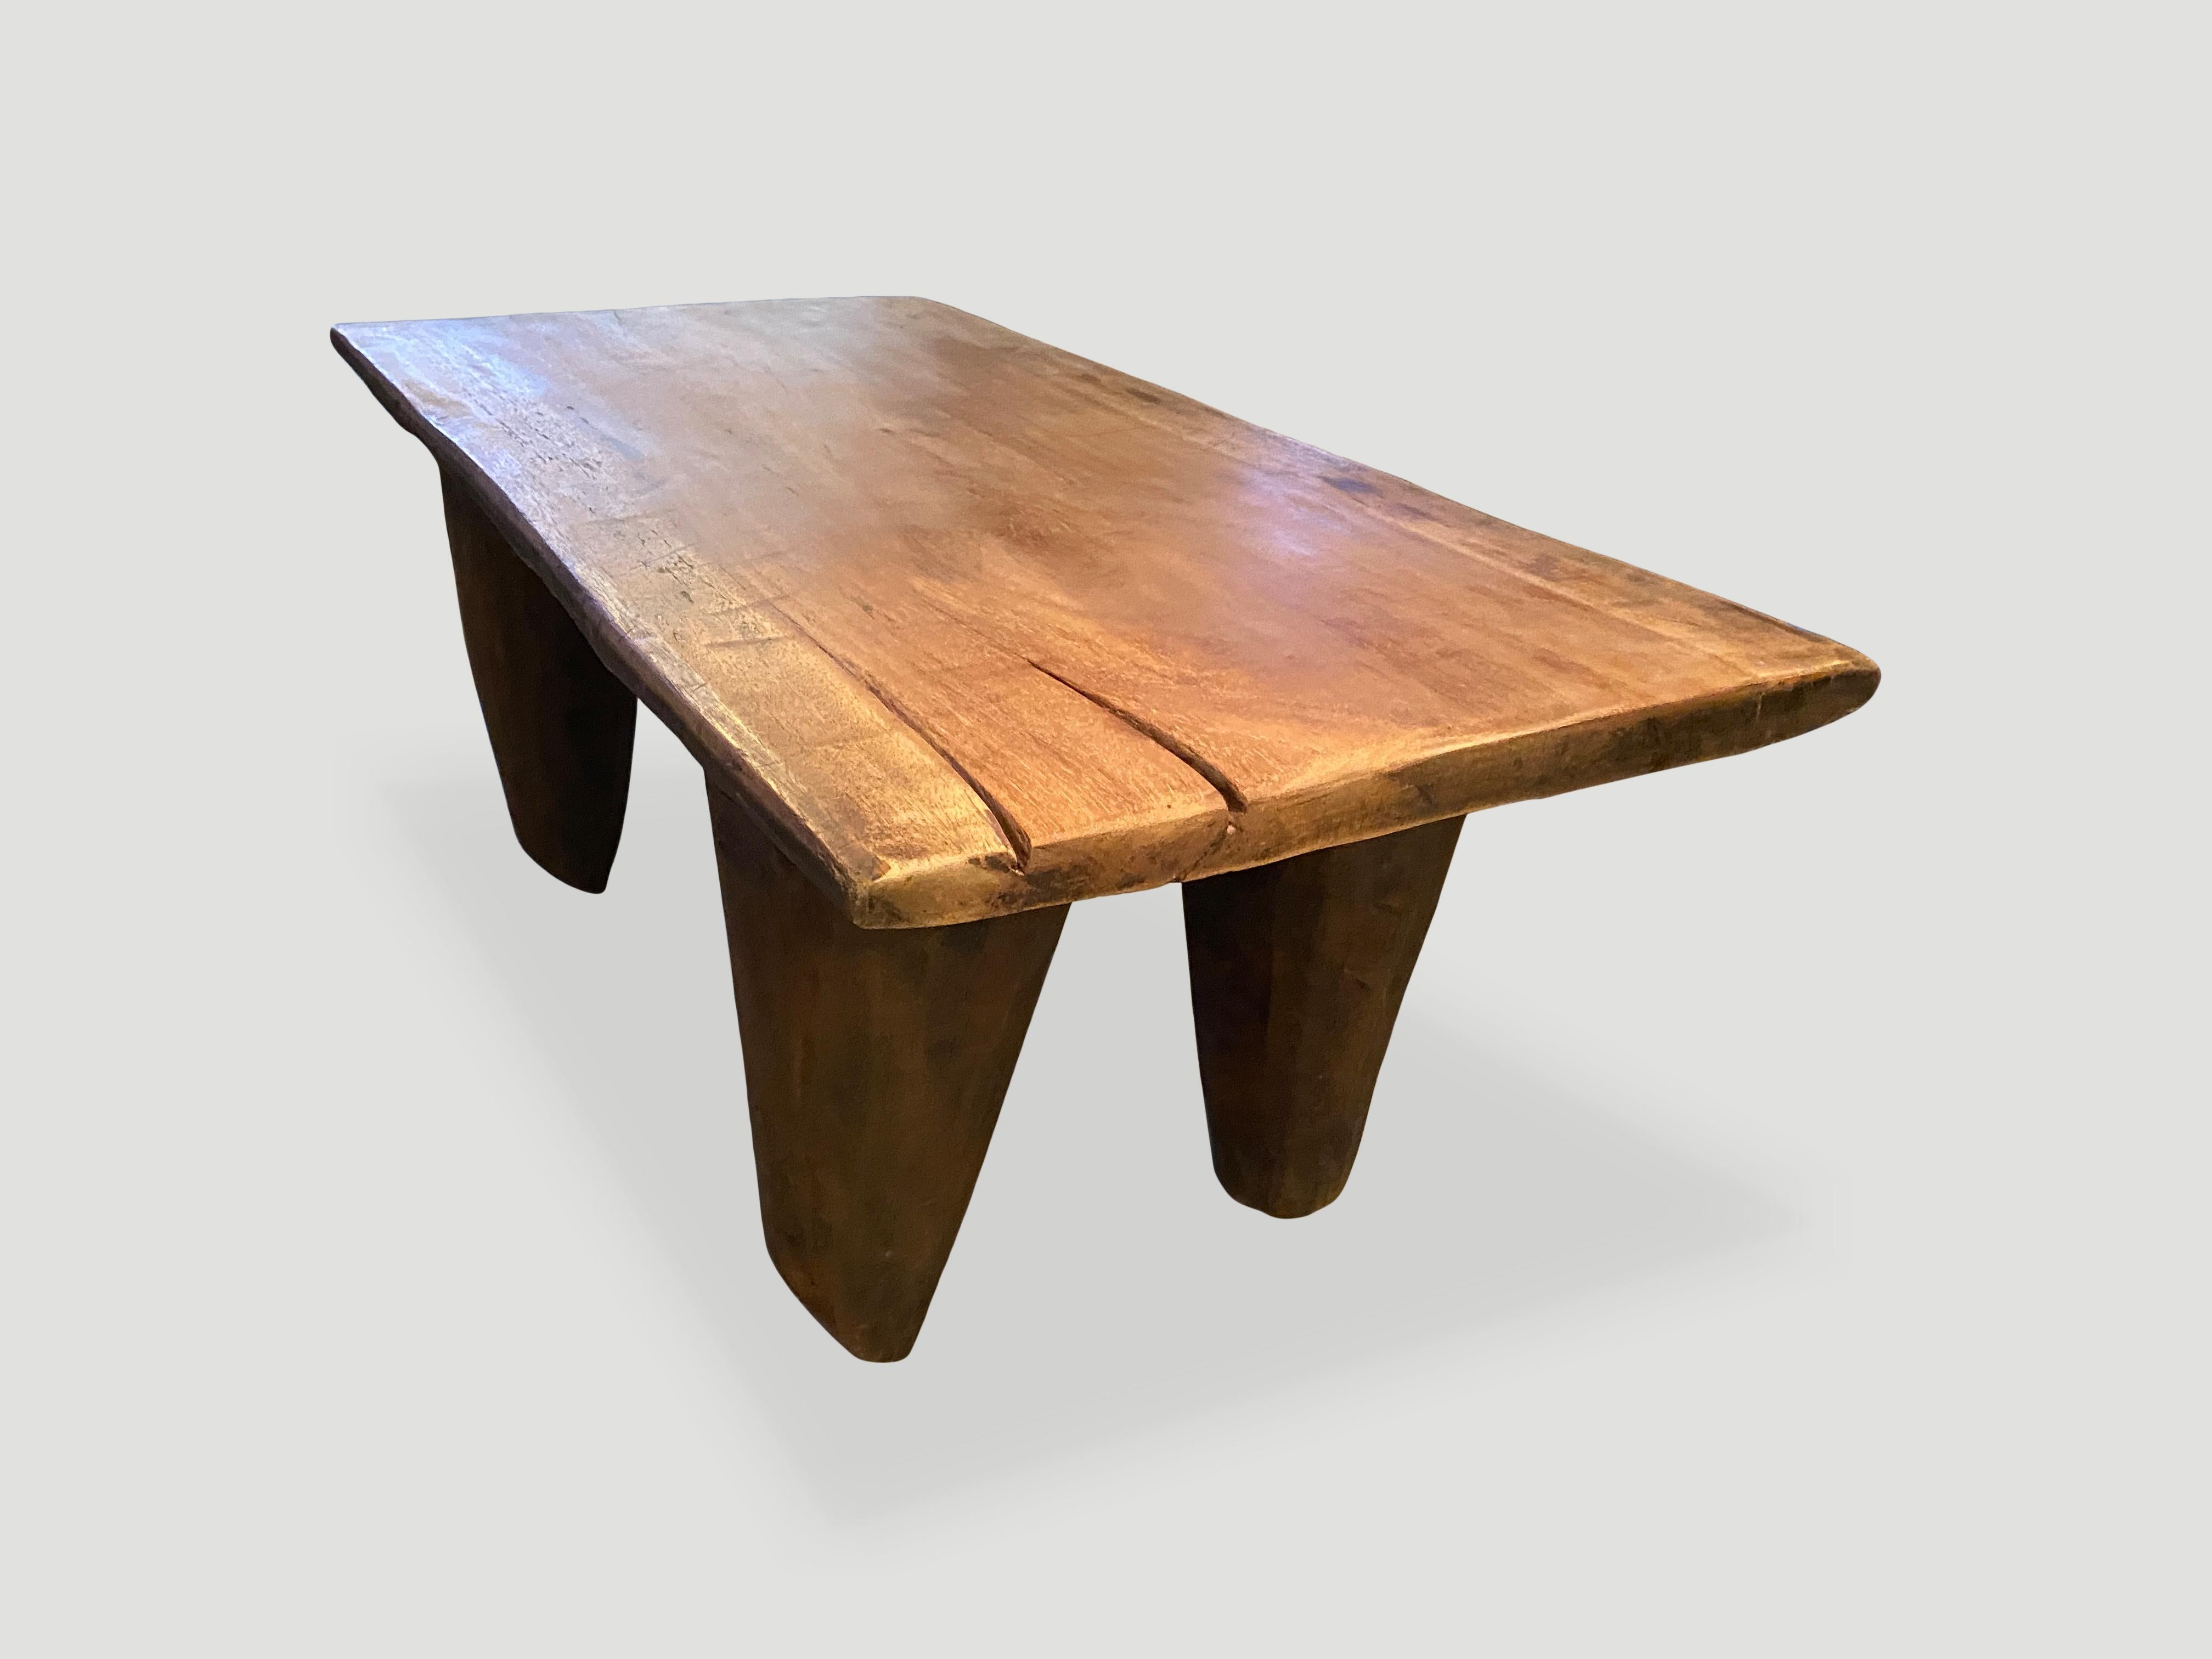 Antique coffee table hand carved by the Senufo tribes from a single block of iroko wood, native to the west coast of Africa. The wood is tough, dense and very durable. Shown with cone style legs. We only source the best. 

This bench or coffee